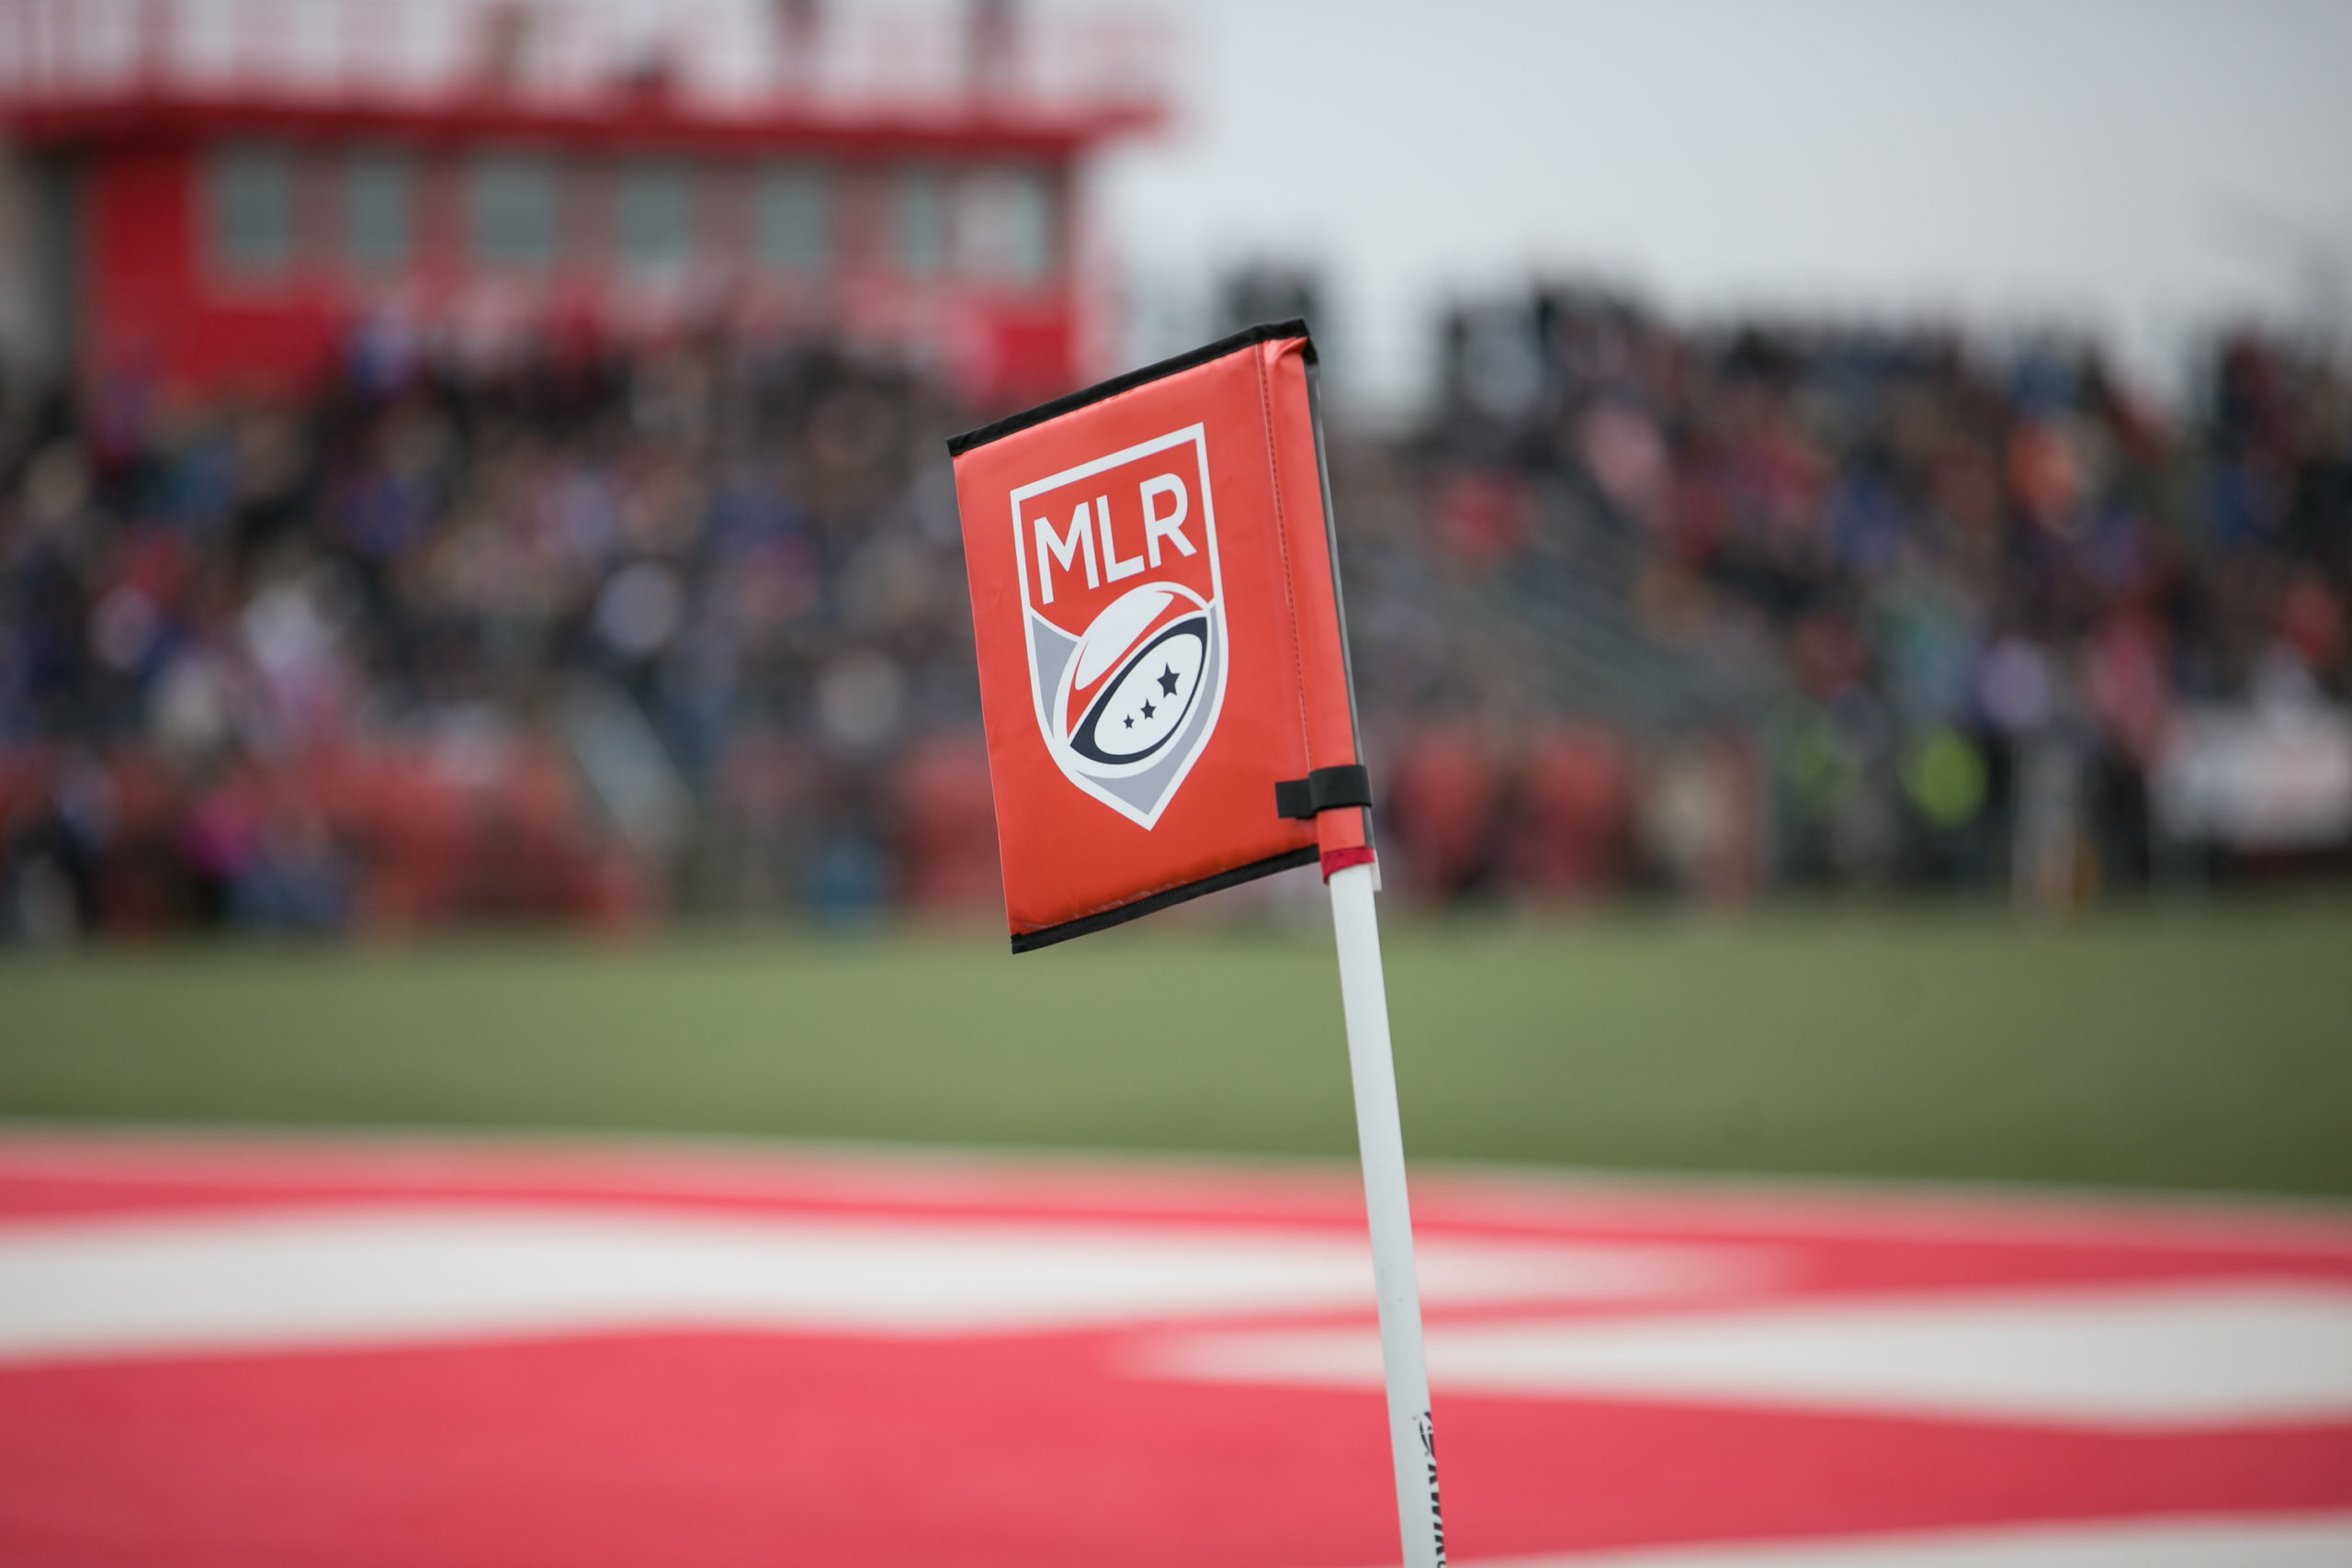 CLUB STATEMENT: MLR Cancels 2020 Season, Turns Attention to 2021